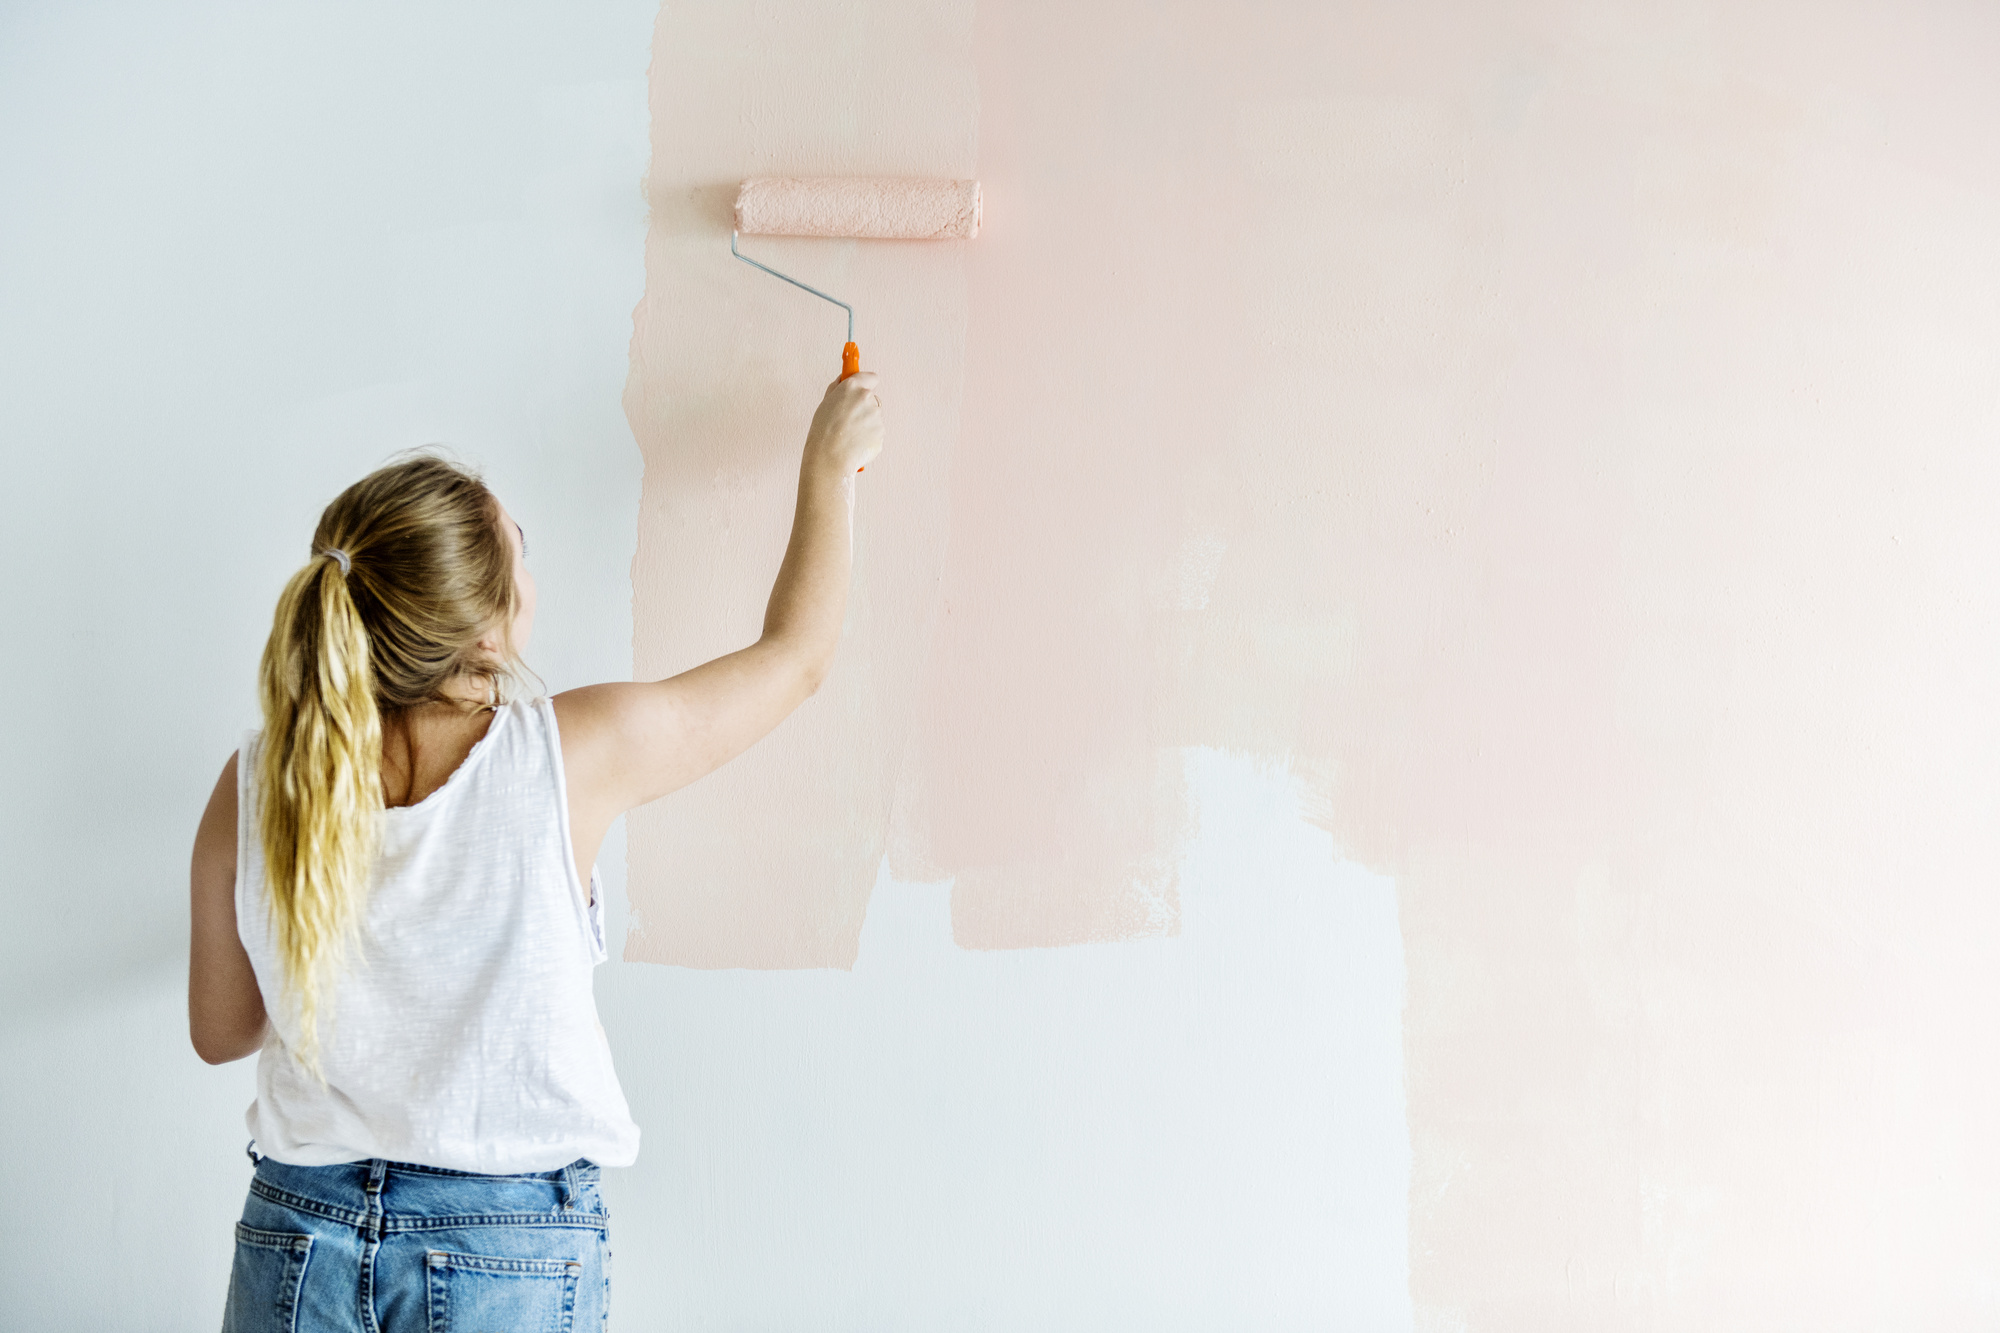 Do you want to paint your house, but don’t know how or where to start? Click here to learn how to paint a house interior from start to finish.